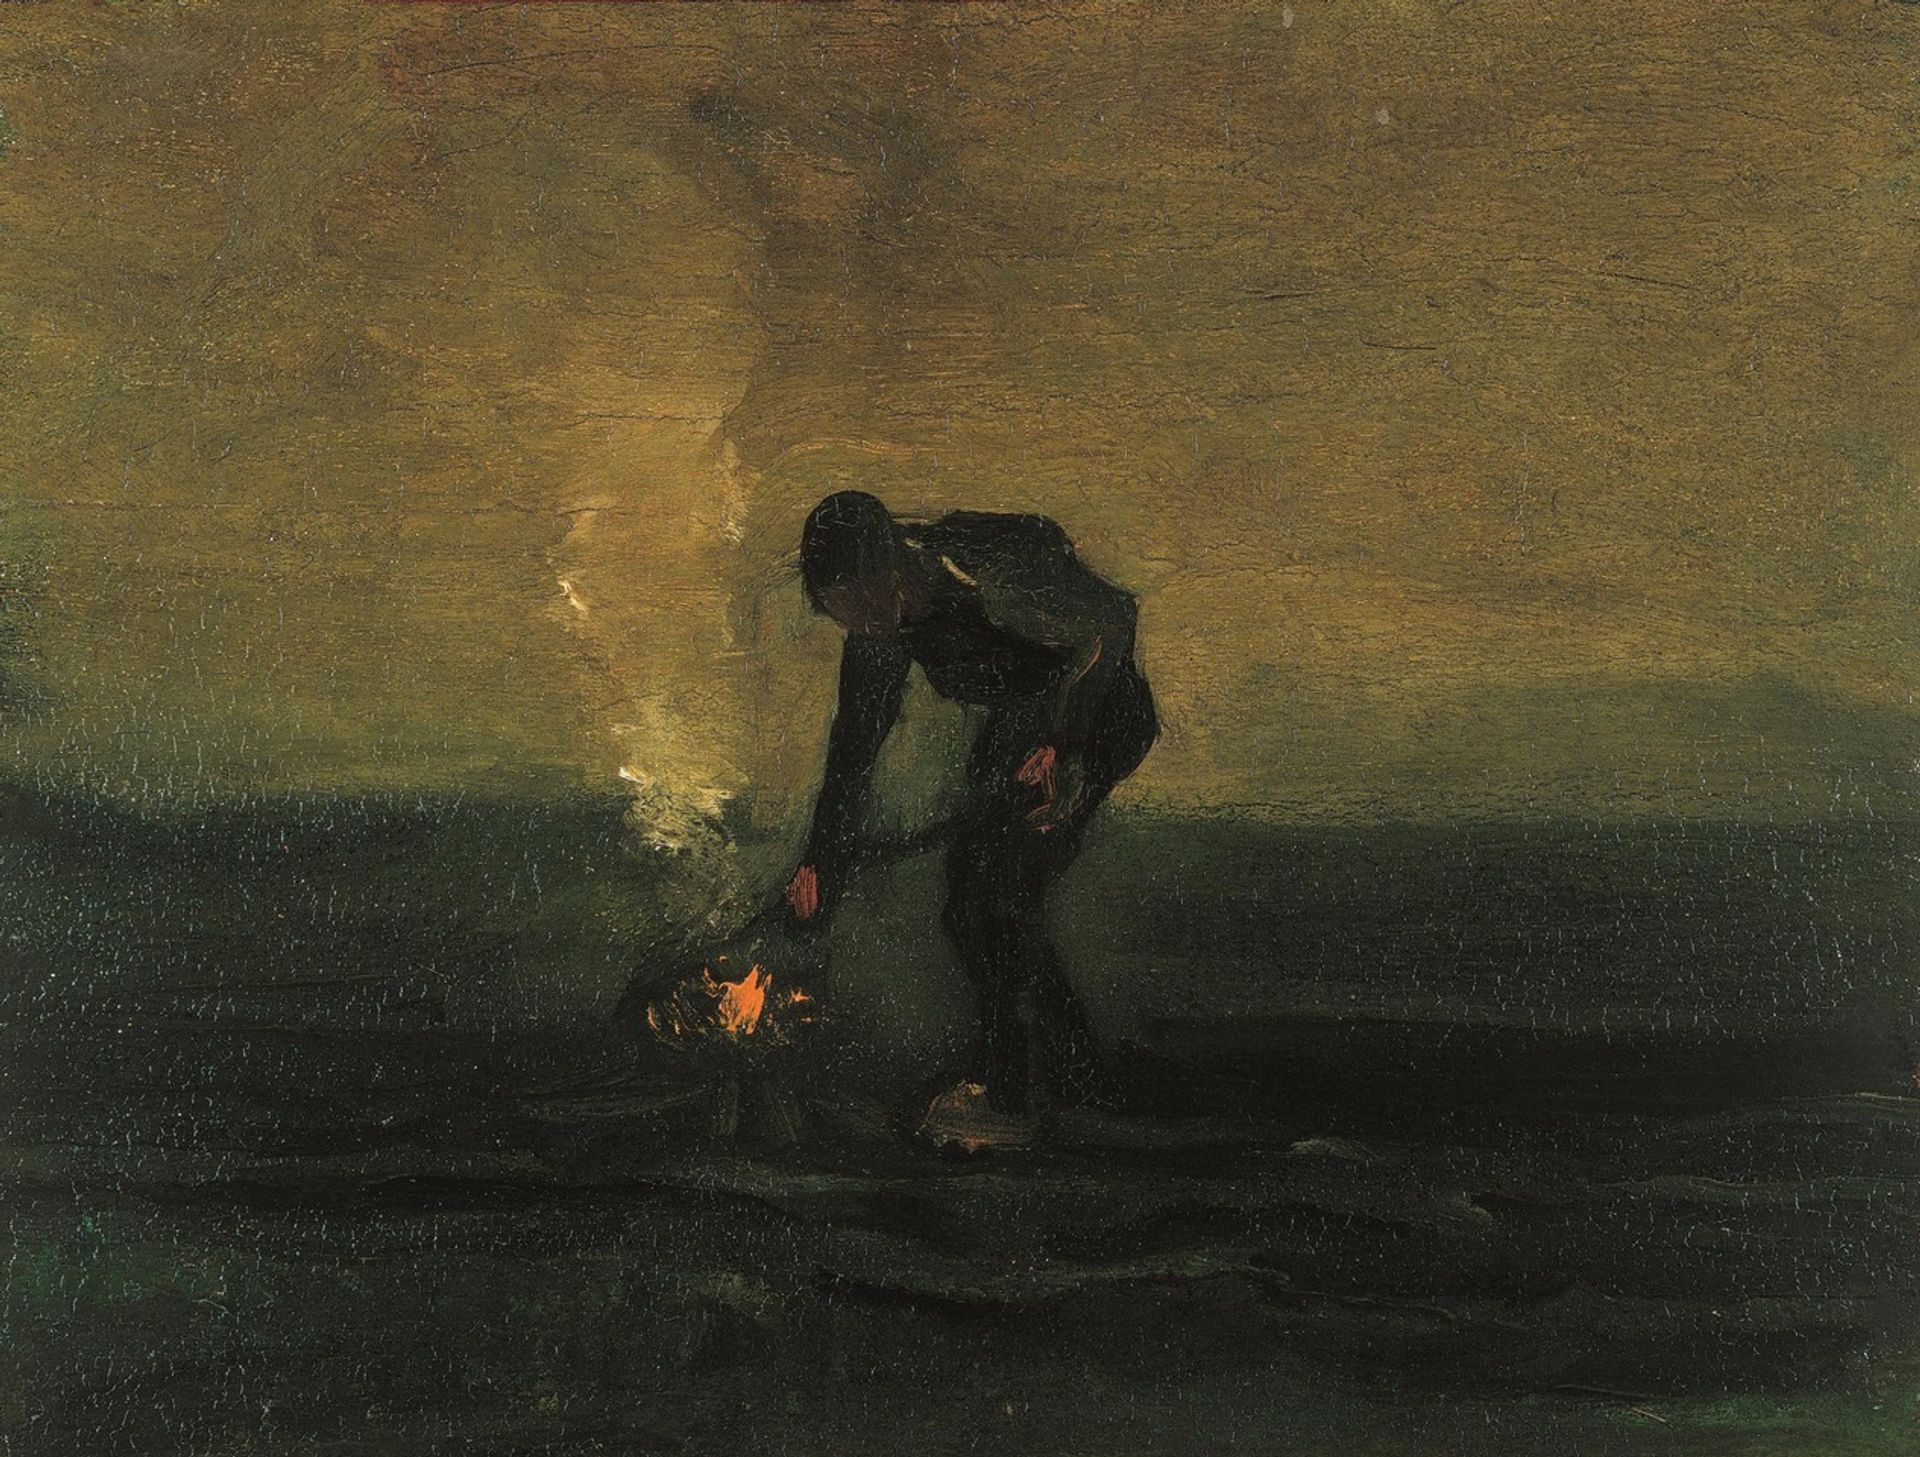 Van Gogh painted Peasant burning Weeds when he visited Drenthe in the north of the Netherlands Courtesy of Drents Museum, Assen and the Van Gogh Museum, Amsterdam